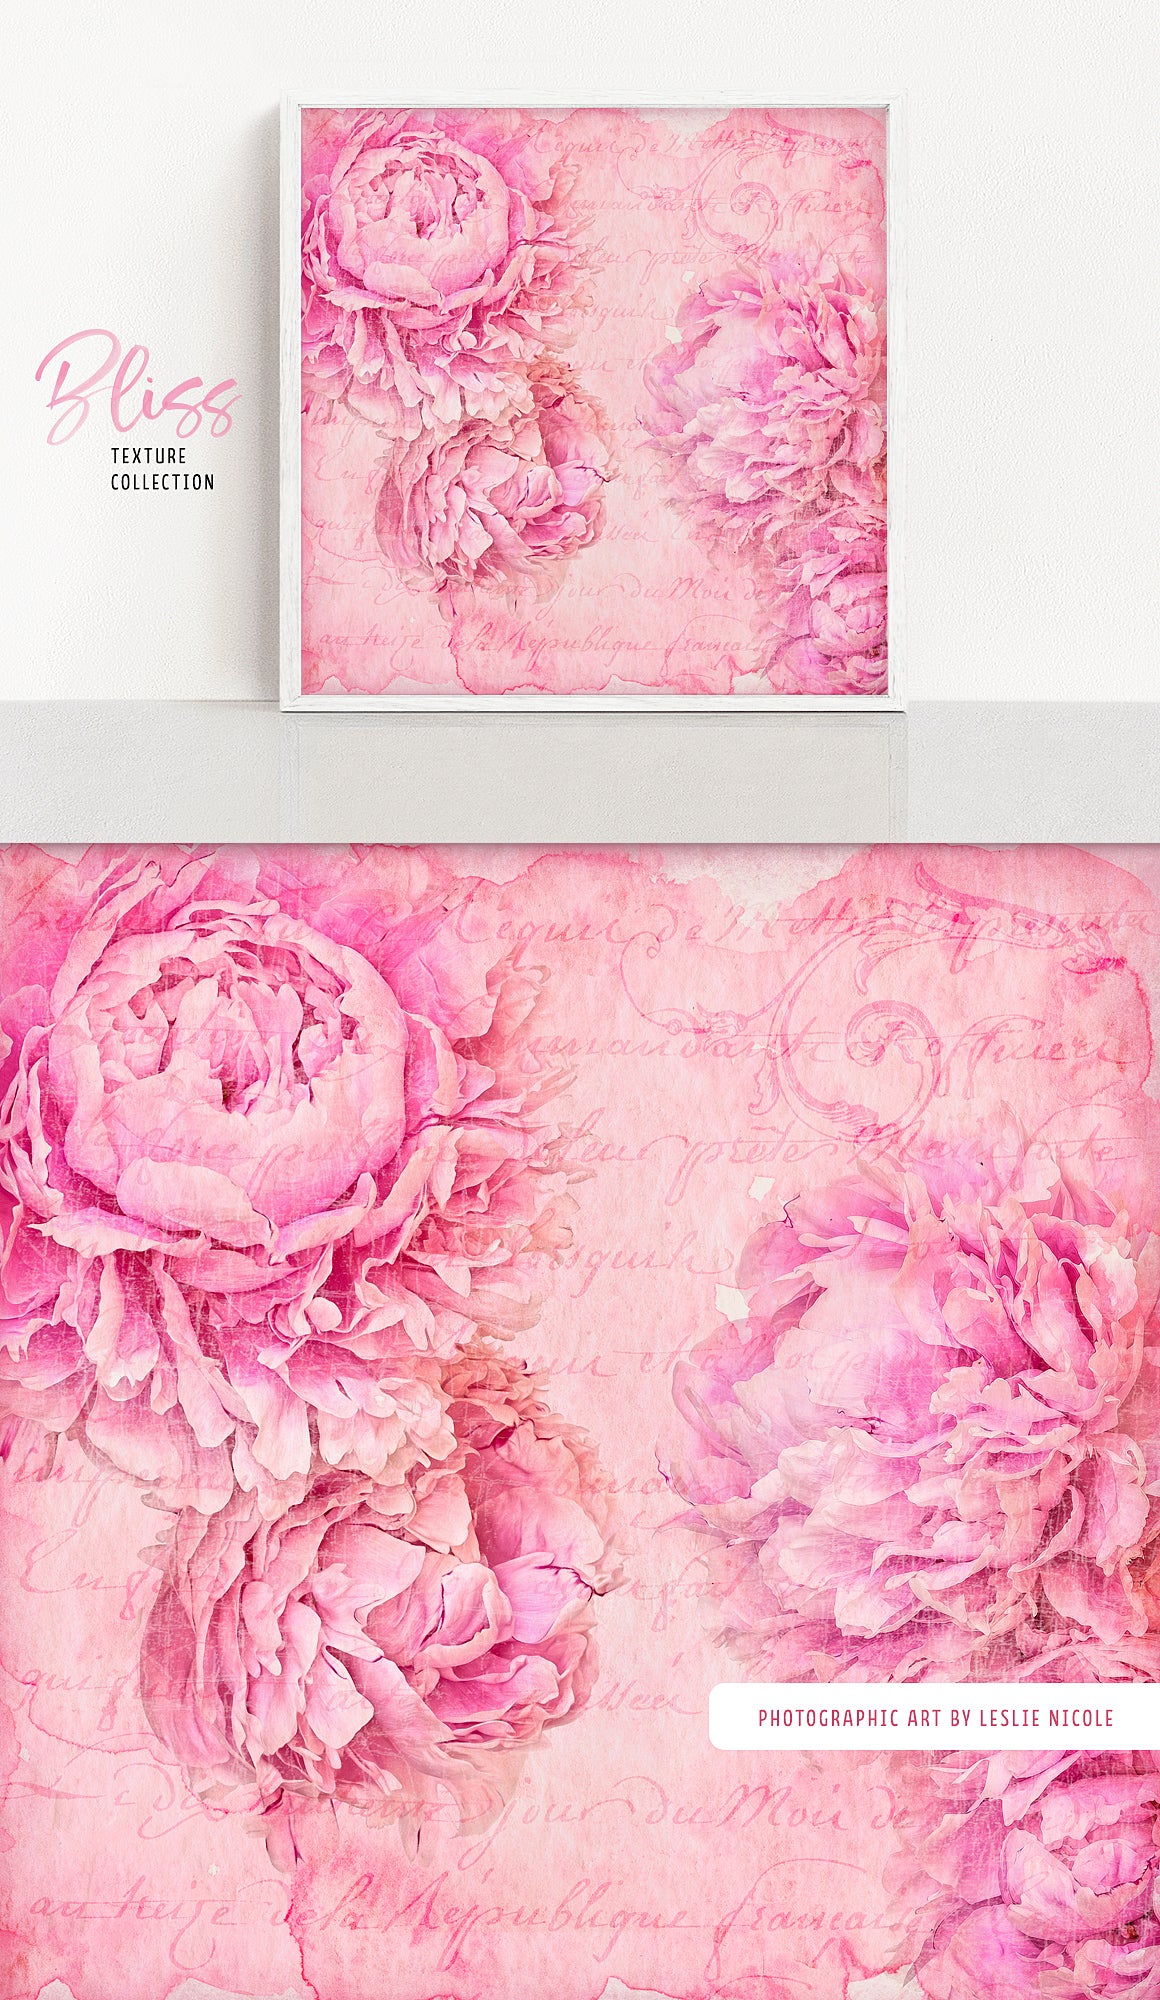 Peonies photograph with watercolor textures by Leslie Nicole using the Bliss collection.